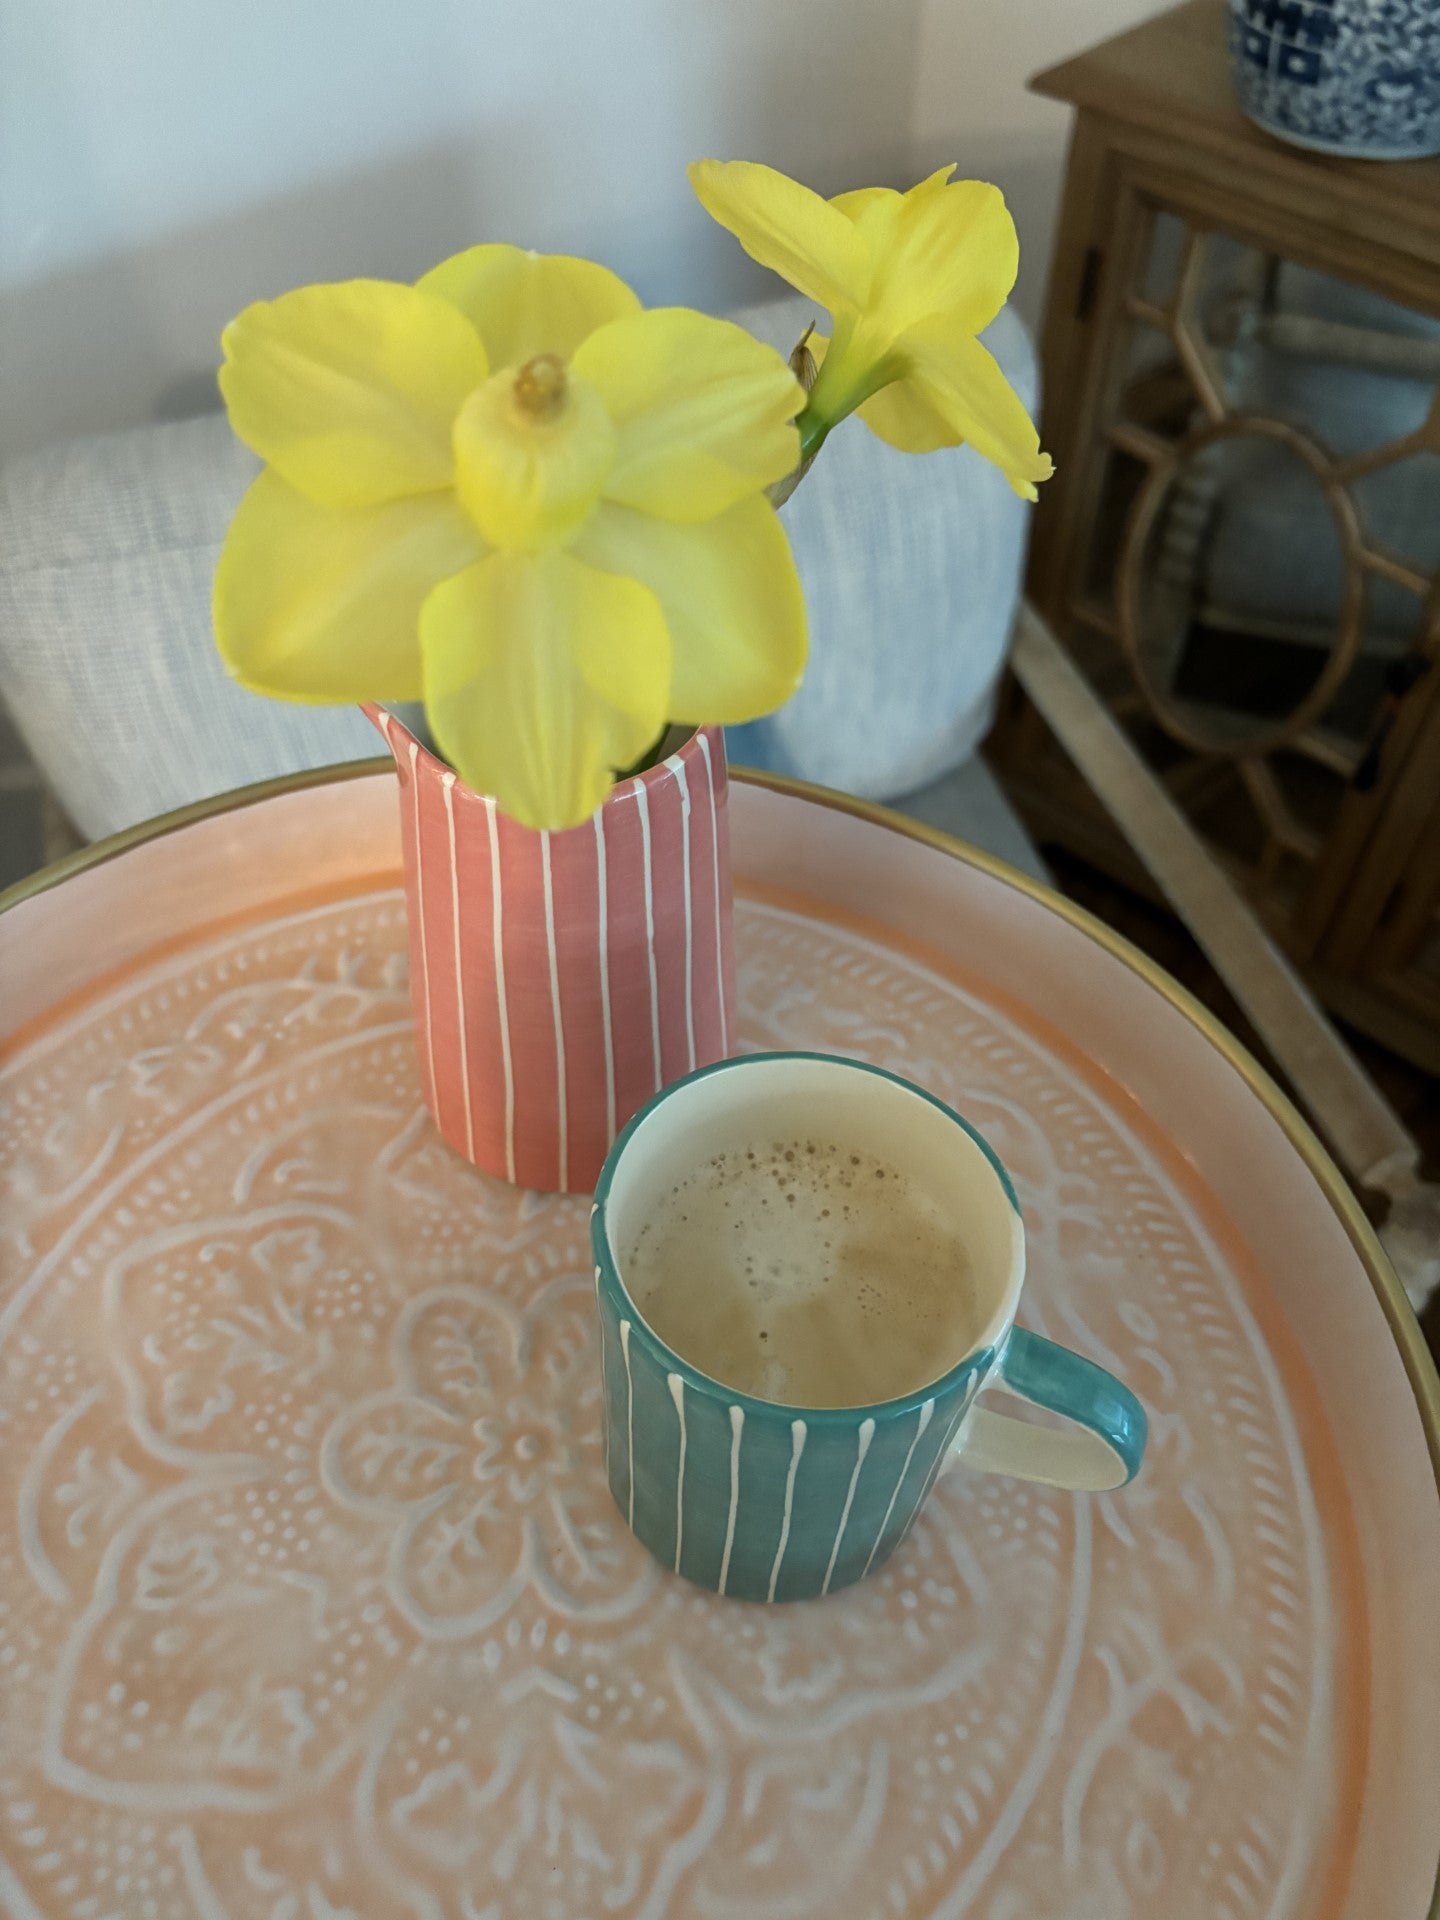 A light pink enamel tray with a pink vase of daffodils and a cup of coffee.